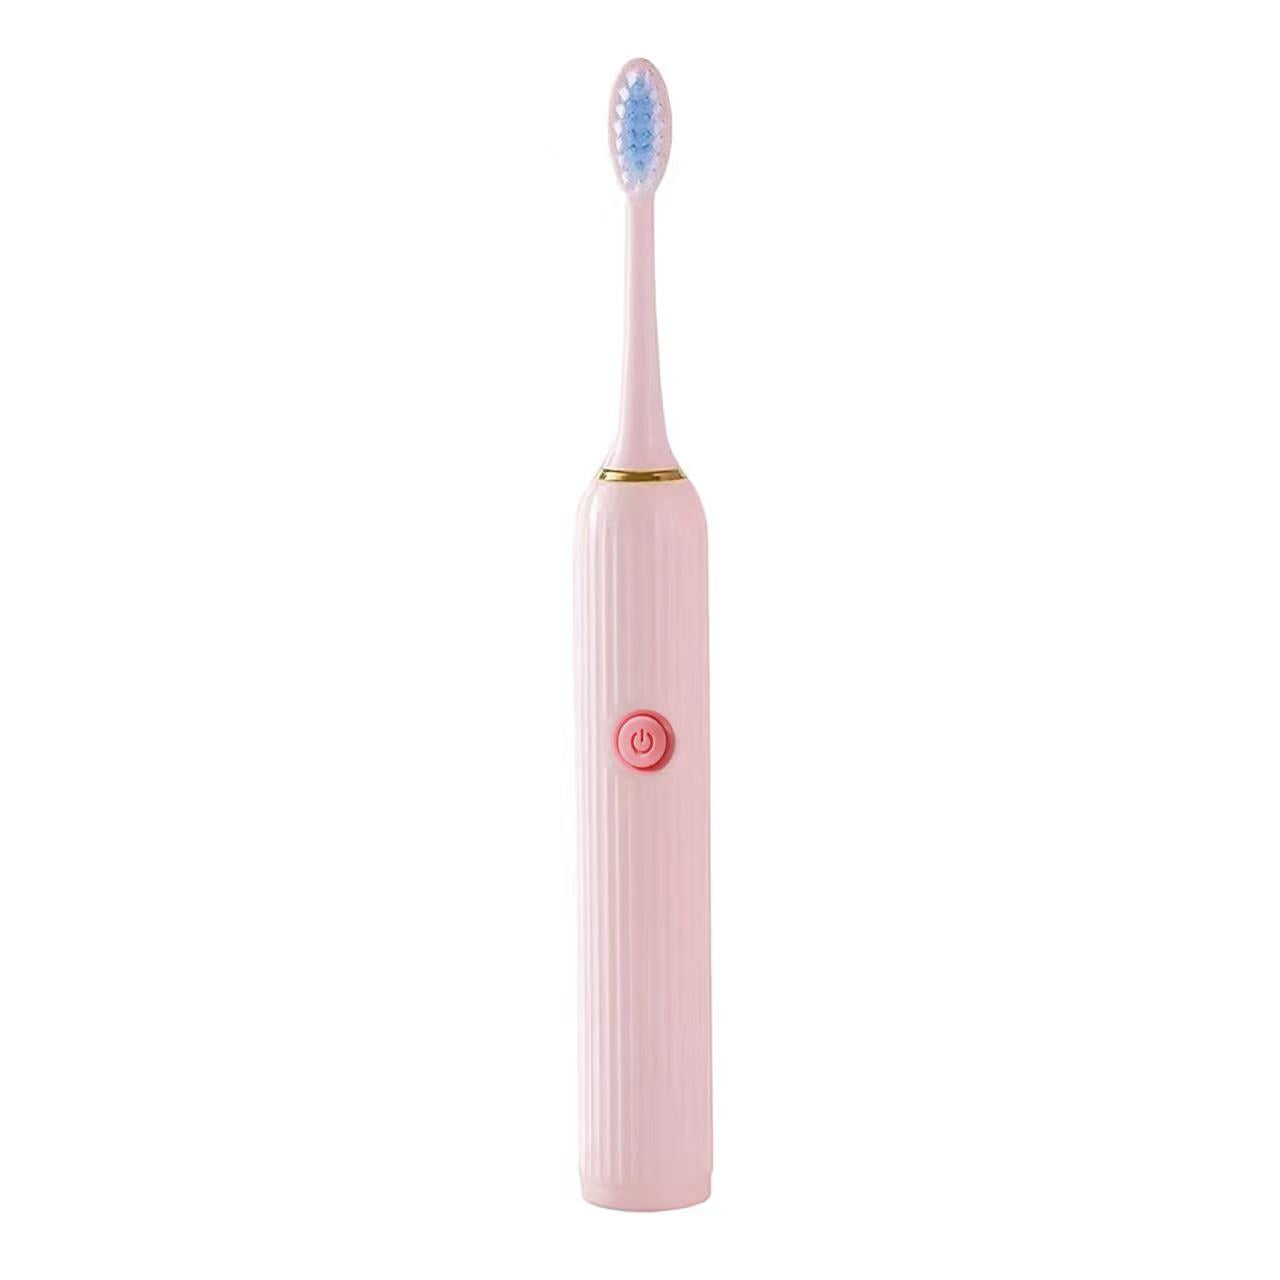 MINISO BATTERY POWERED ROMAN PILLAR DESIGN ELECTRIC TOOTHBRUSH WITH 3 HEADS  MODEL: BBKH06(PINK) 2013793613102 ELECTRIC BRUSH